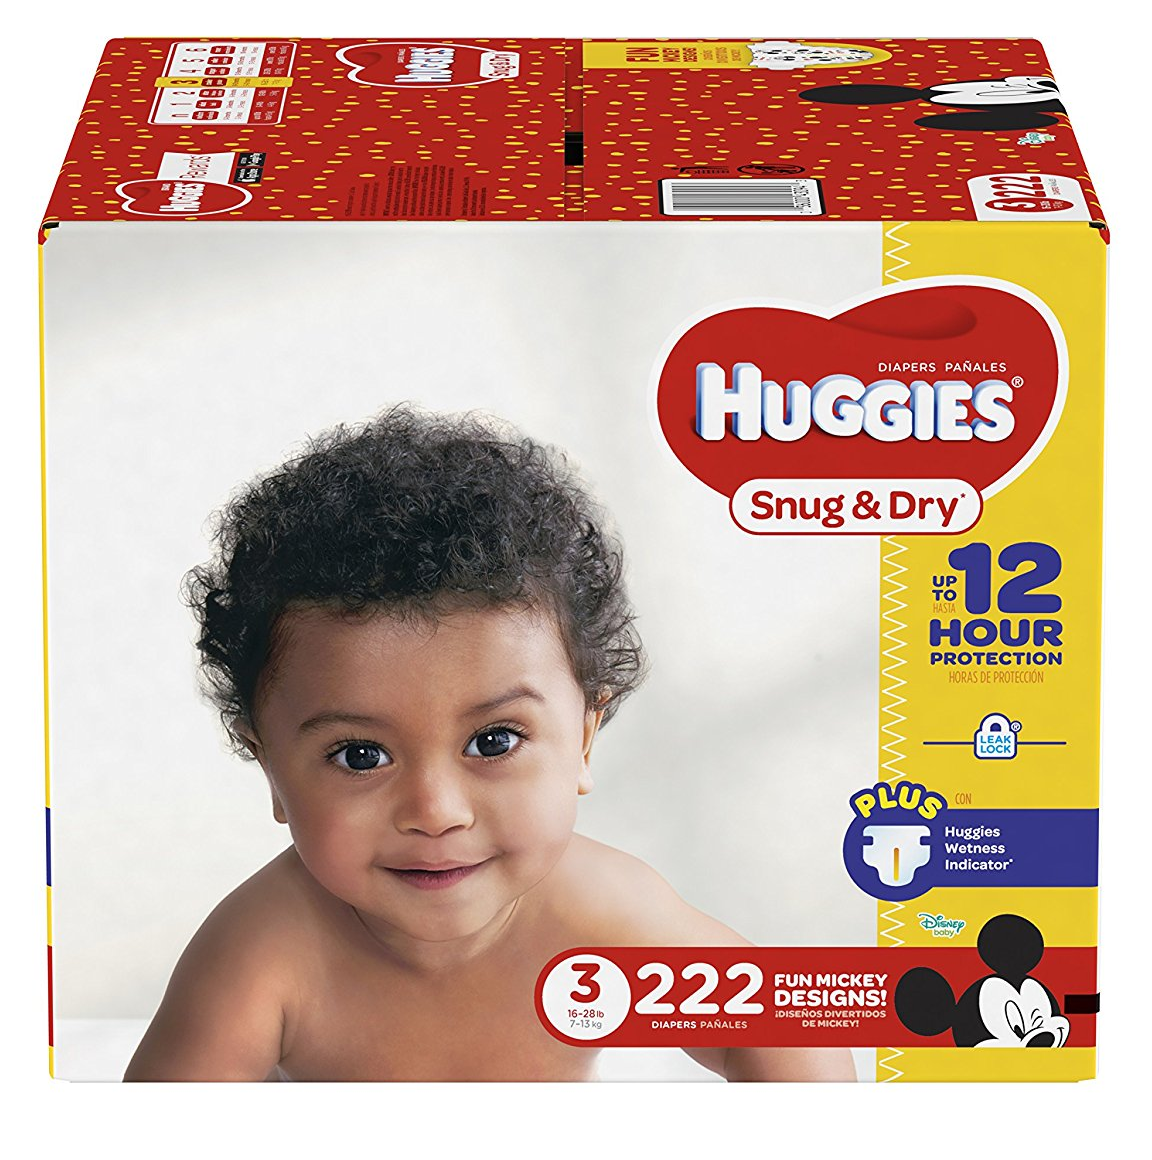 HOT! Huggies Snug & Dry Diapers (Size 3) Only $21.84 Shipped!